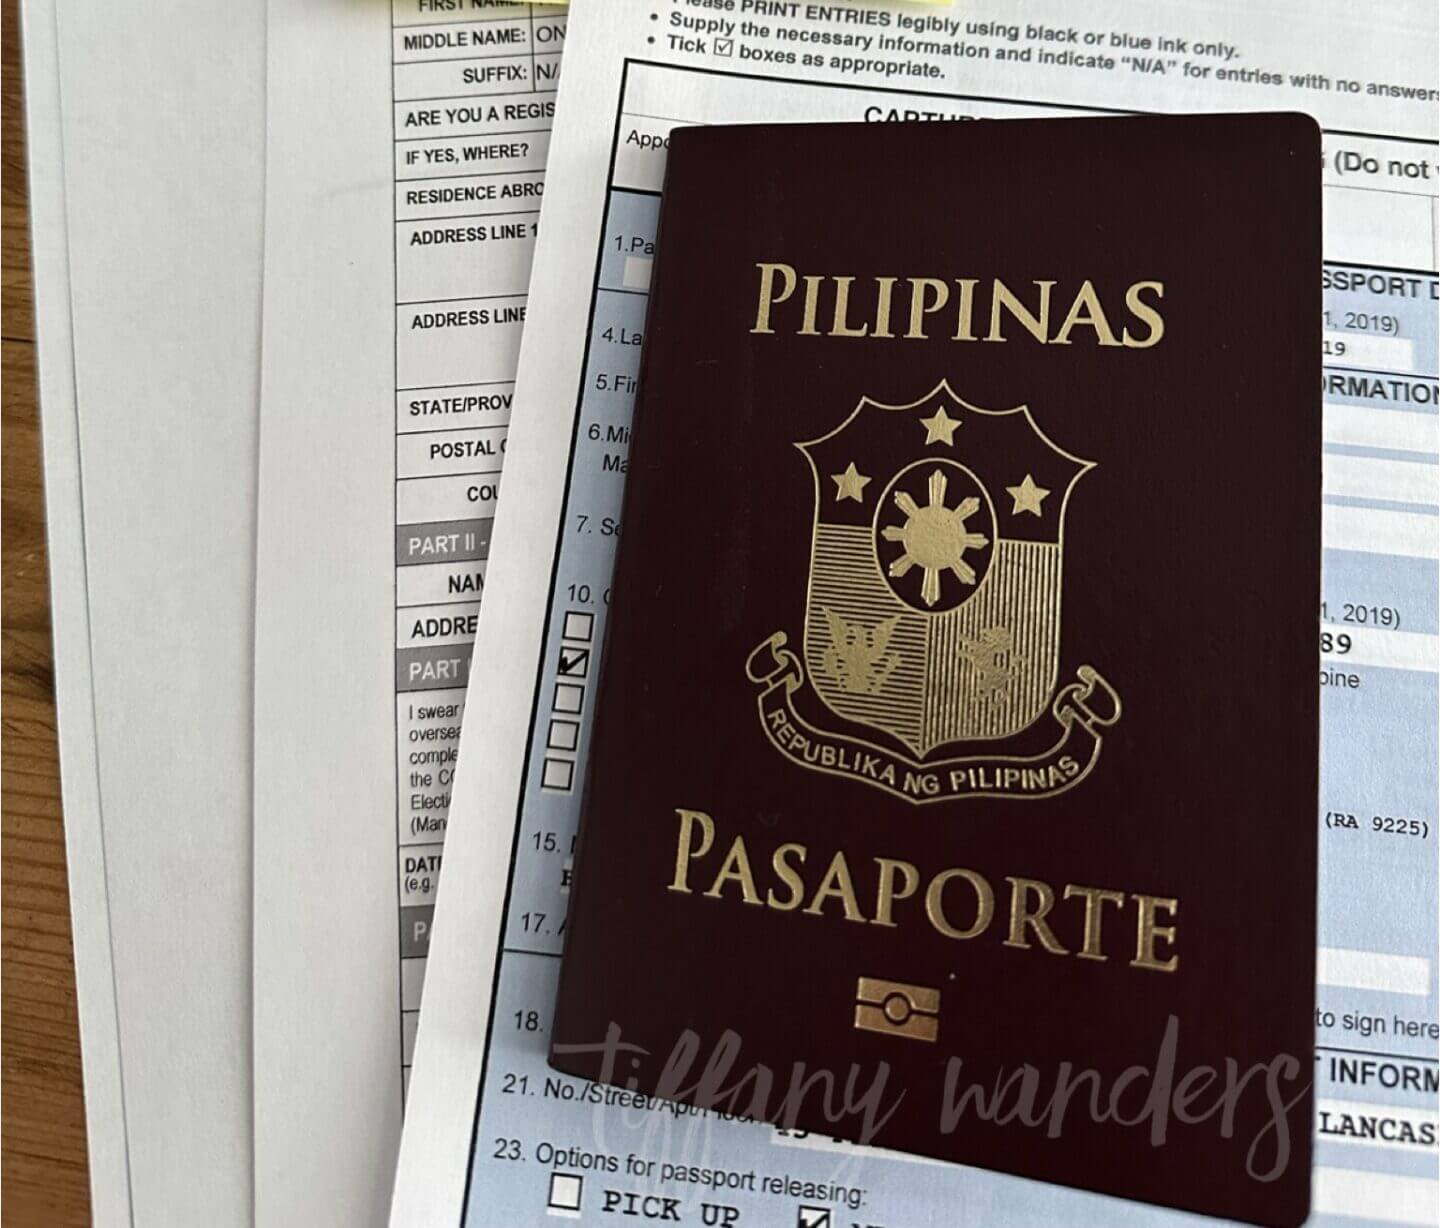 Applying for a New Philippine Passport at the Philippine Embassy (London) – Dual Citizenship